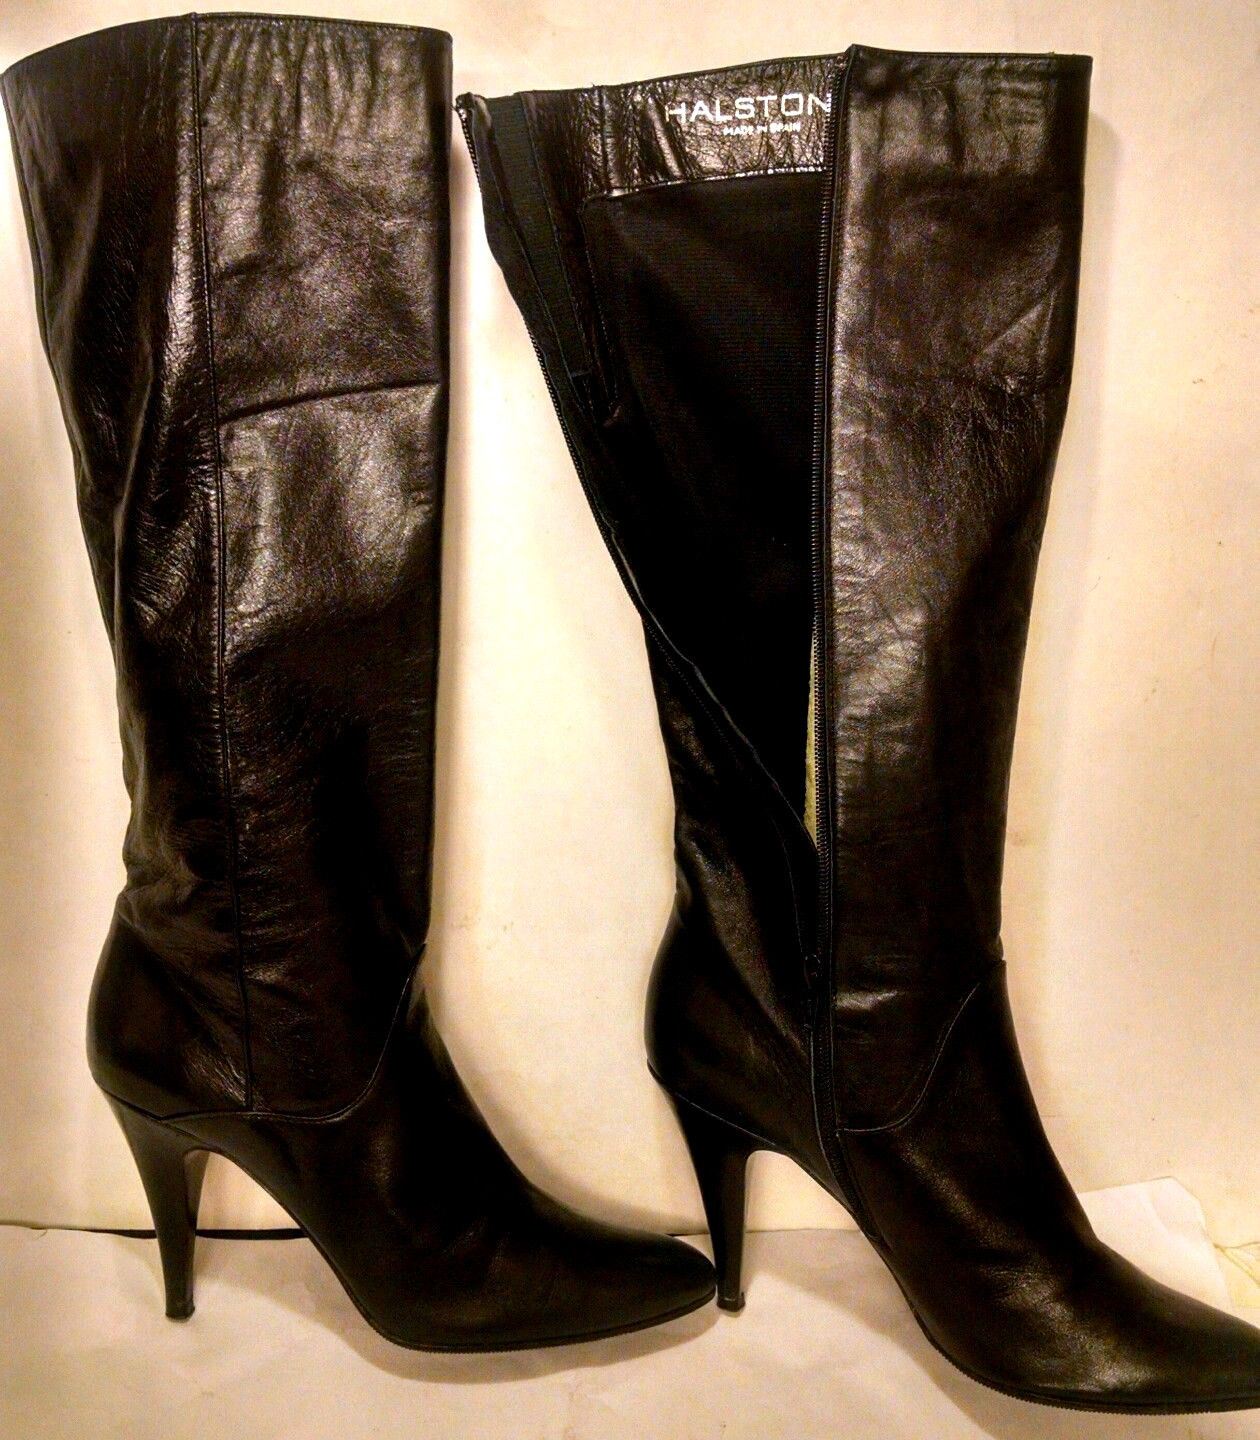 eBay Leather: Vintage 1980s Halston boots make a rare appearance